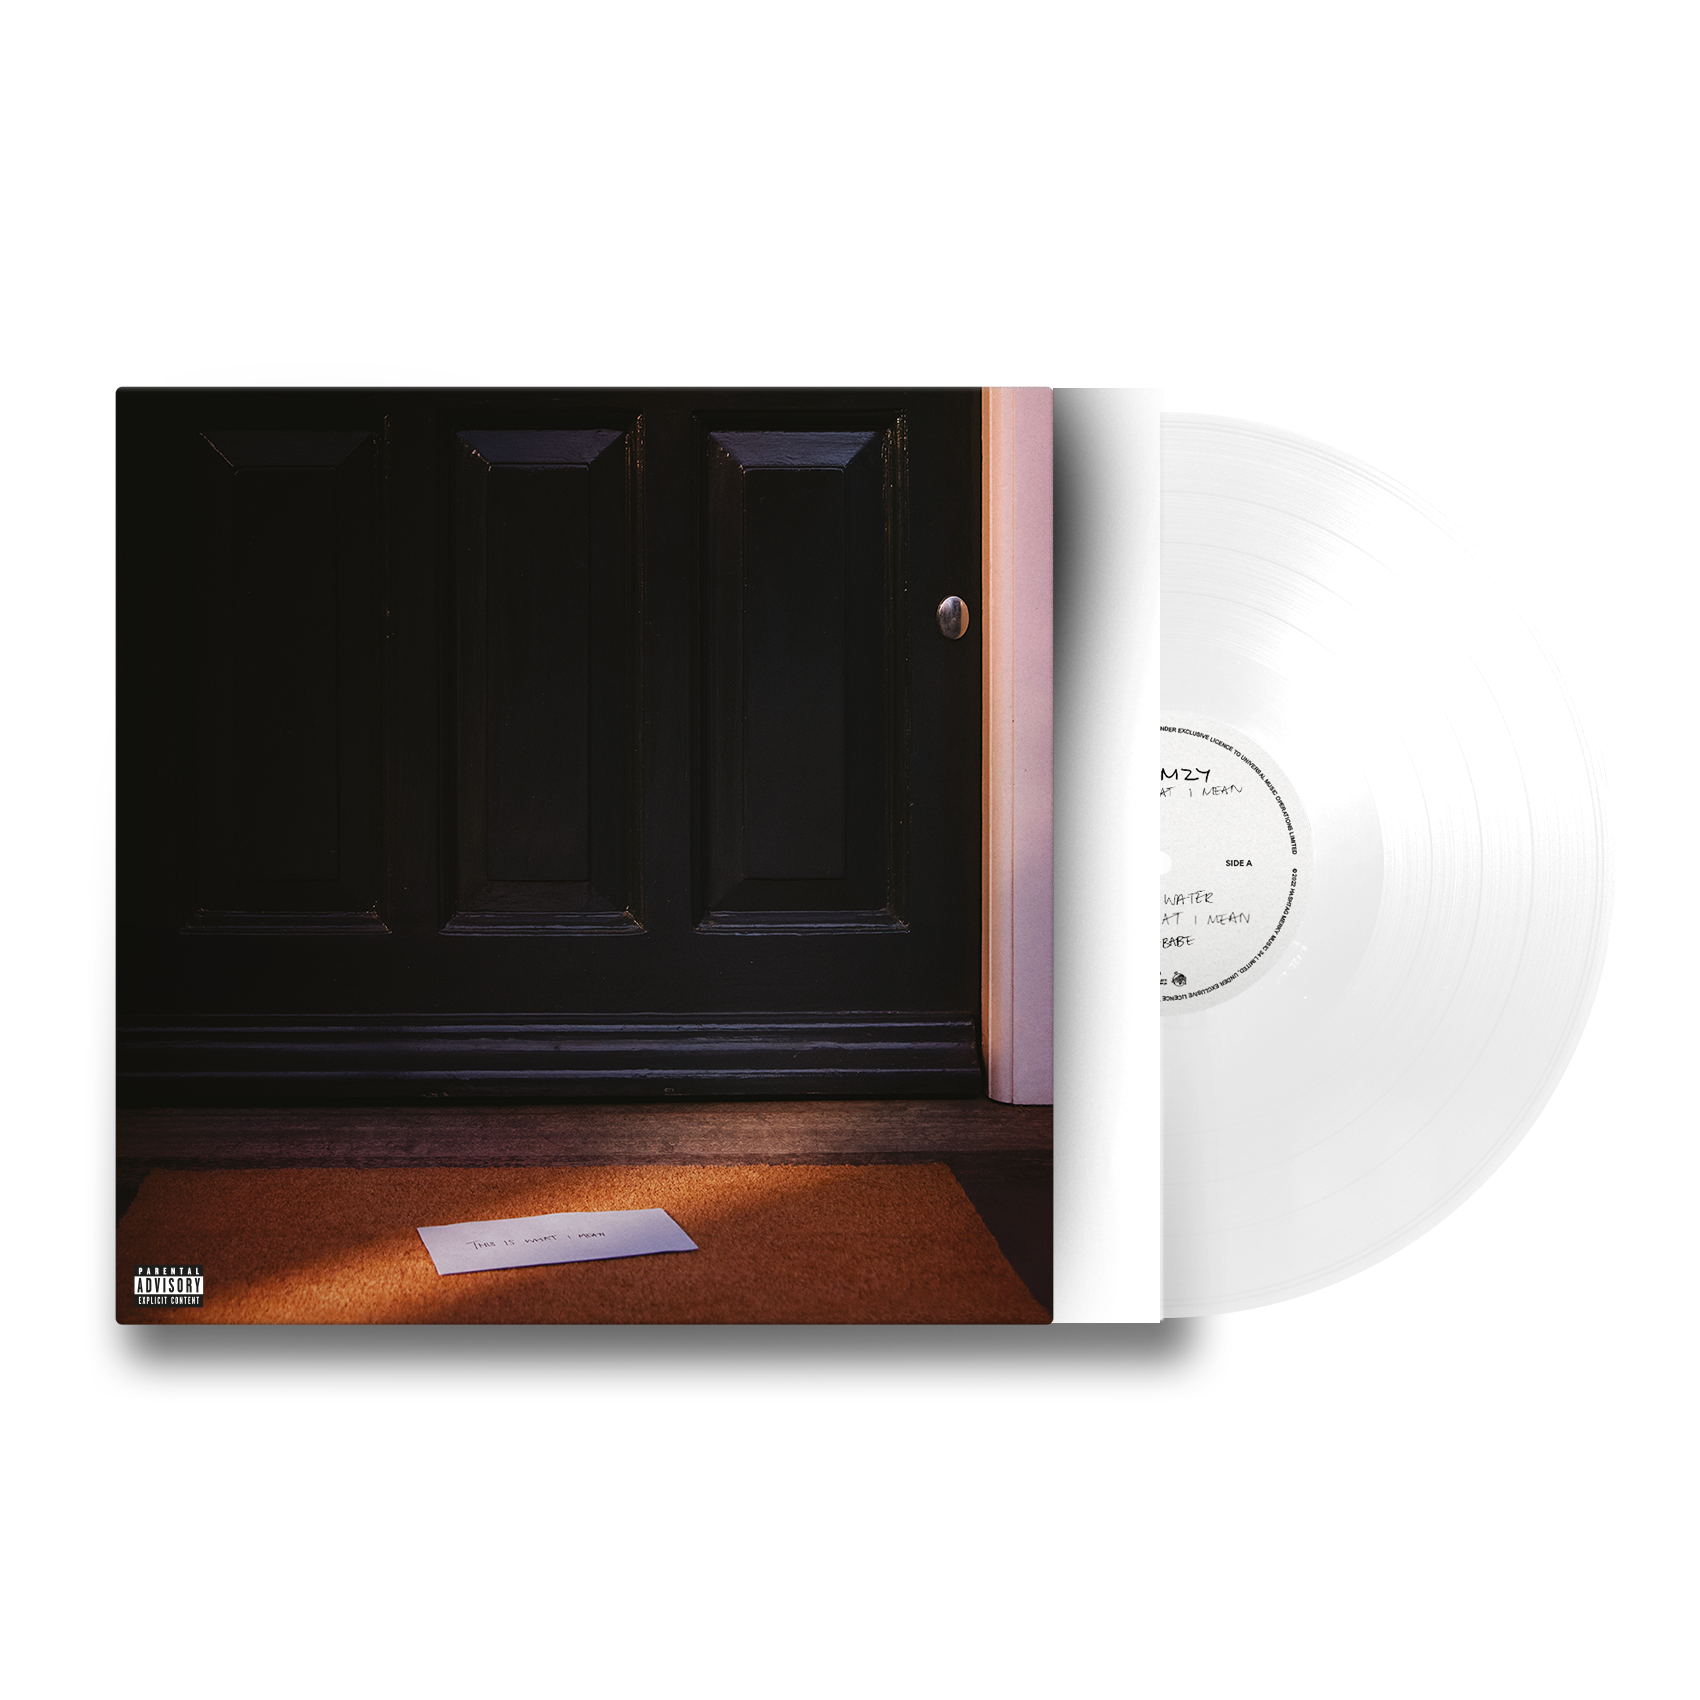 This Is What I Mean: Limited Clear Vinyl 2LP + Signed Art Card